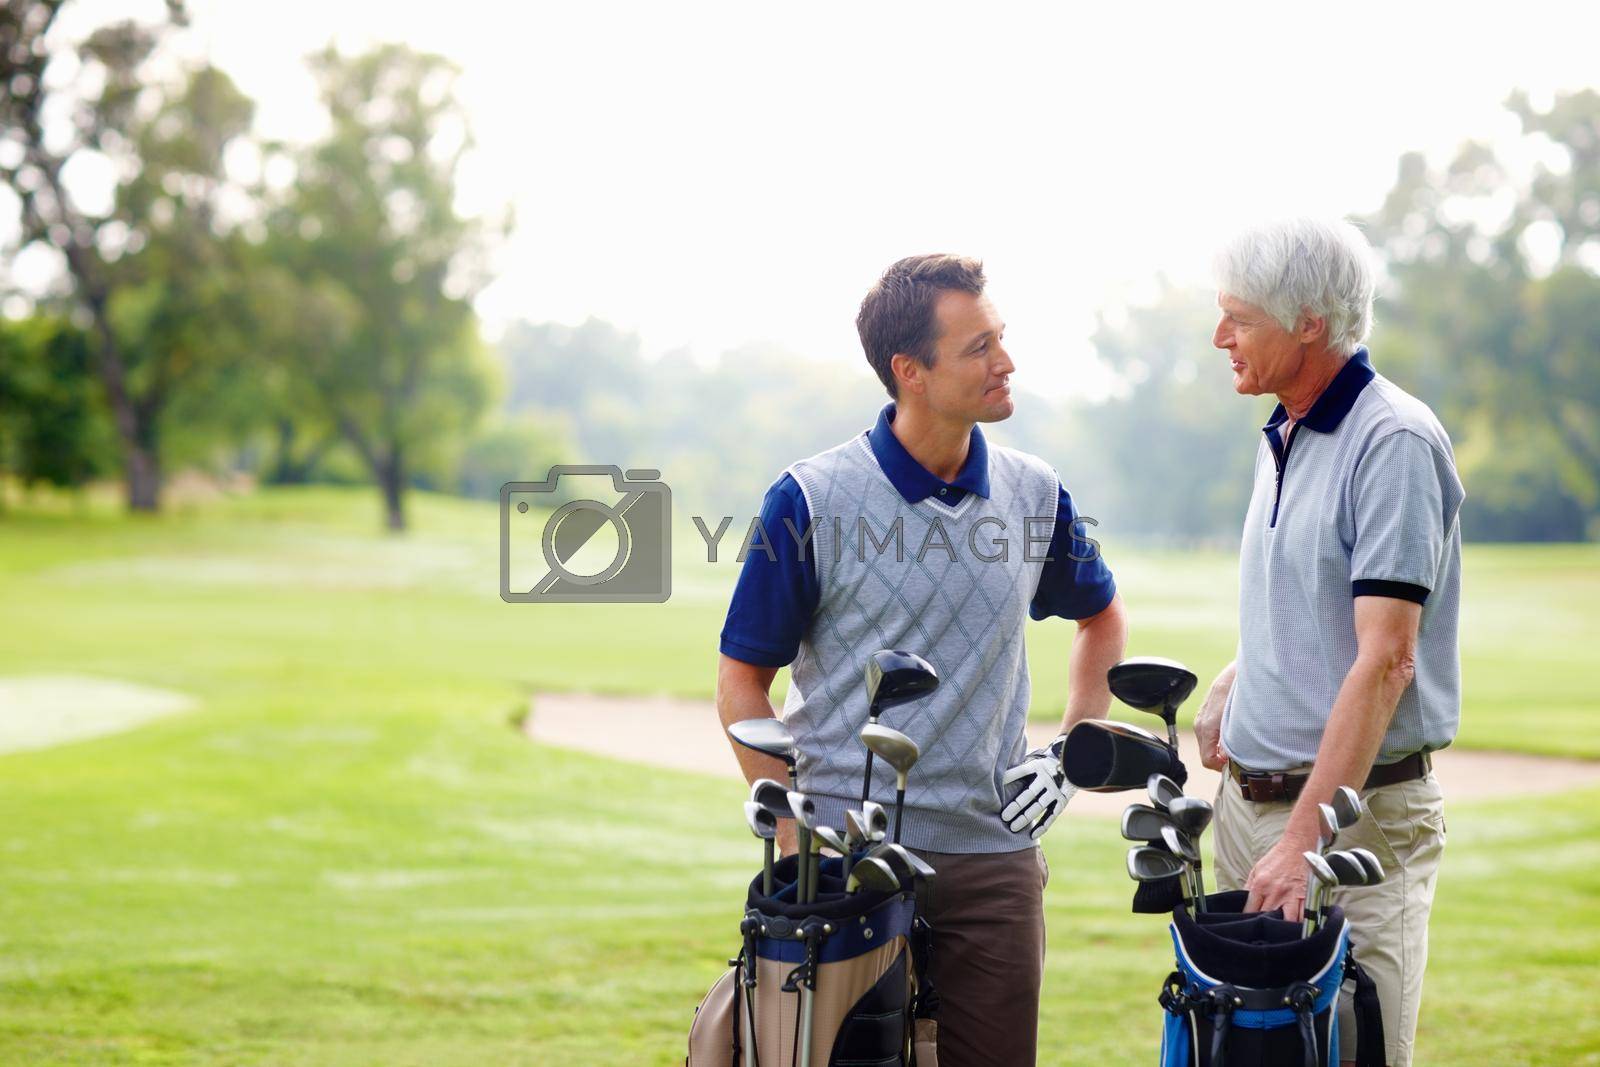 Two golfers in discussion. Father and son standing on golf course and discussing with each other